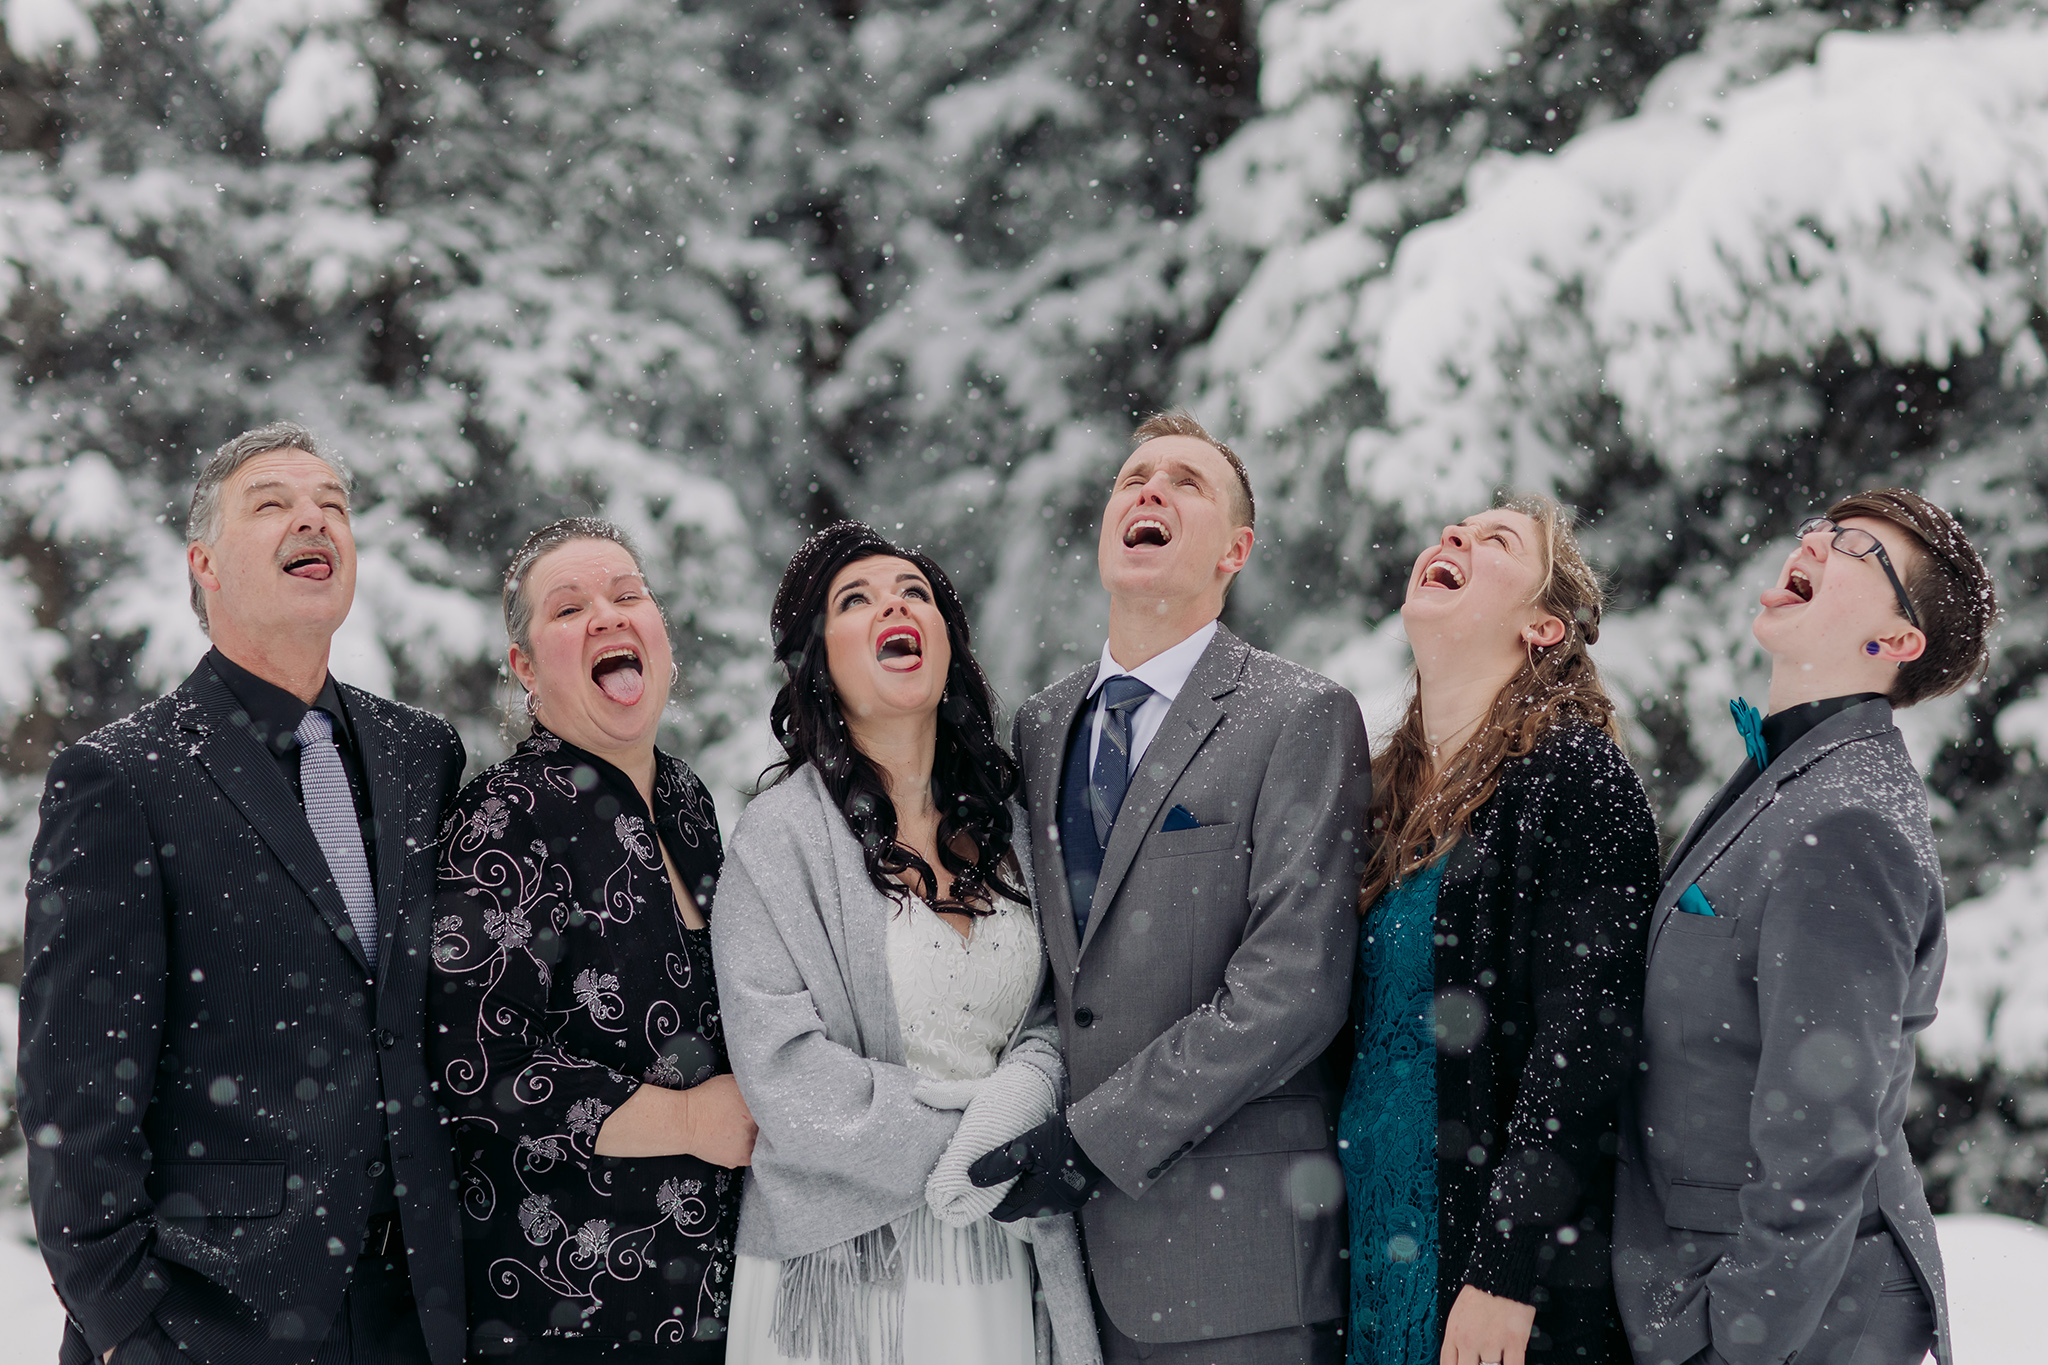 family photos in a snow storm in Banff National Park in the Canadian Rocky Mountains photographed by ENV Photography catching snowflakes